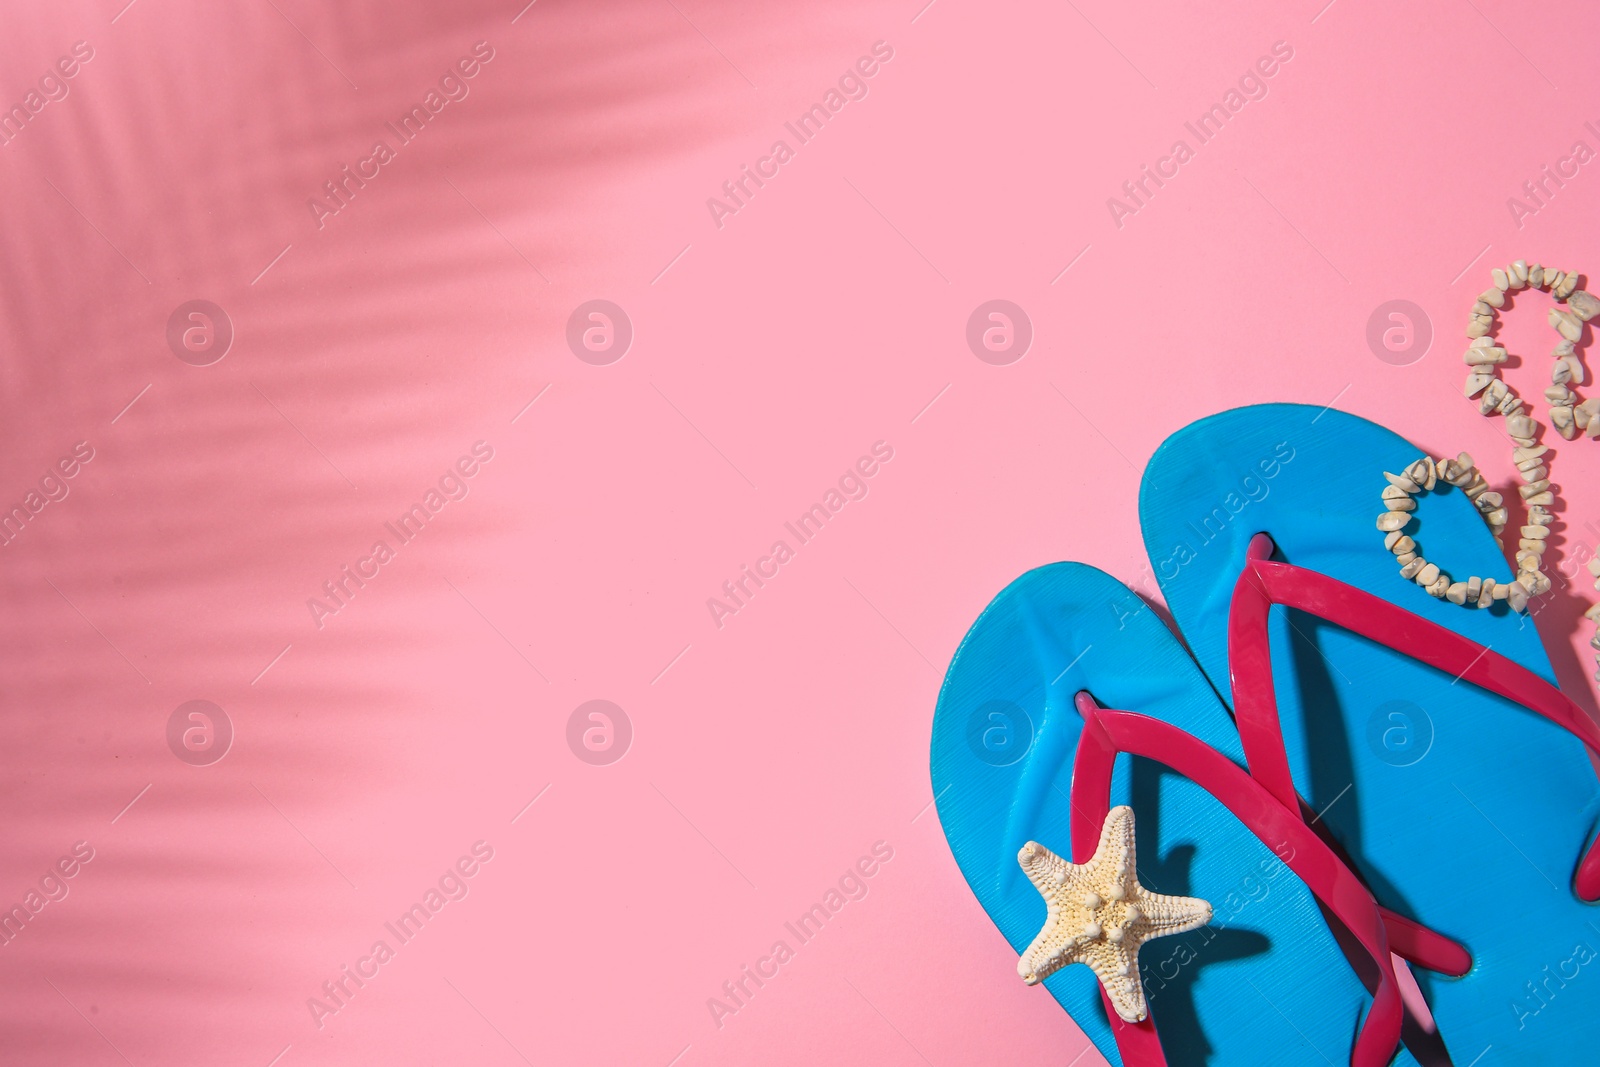 Photo of Light blue flip flops, starfish and necklace on pink background, top view with space for text. Beach accessories